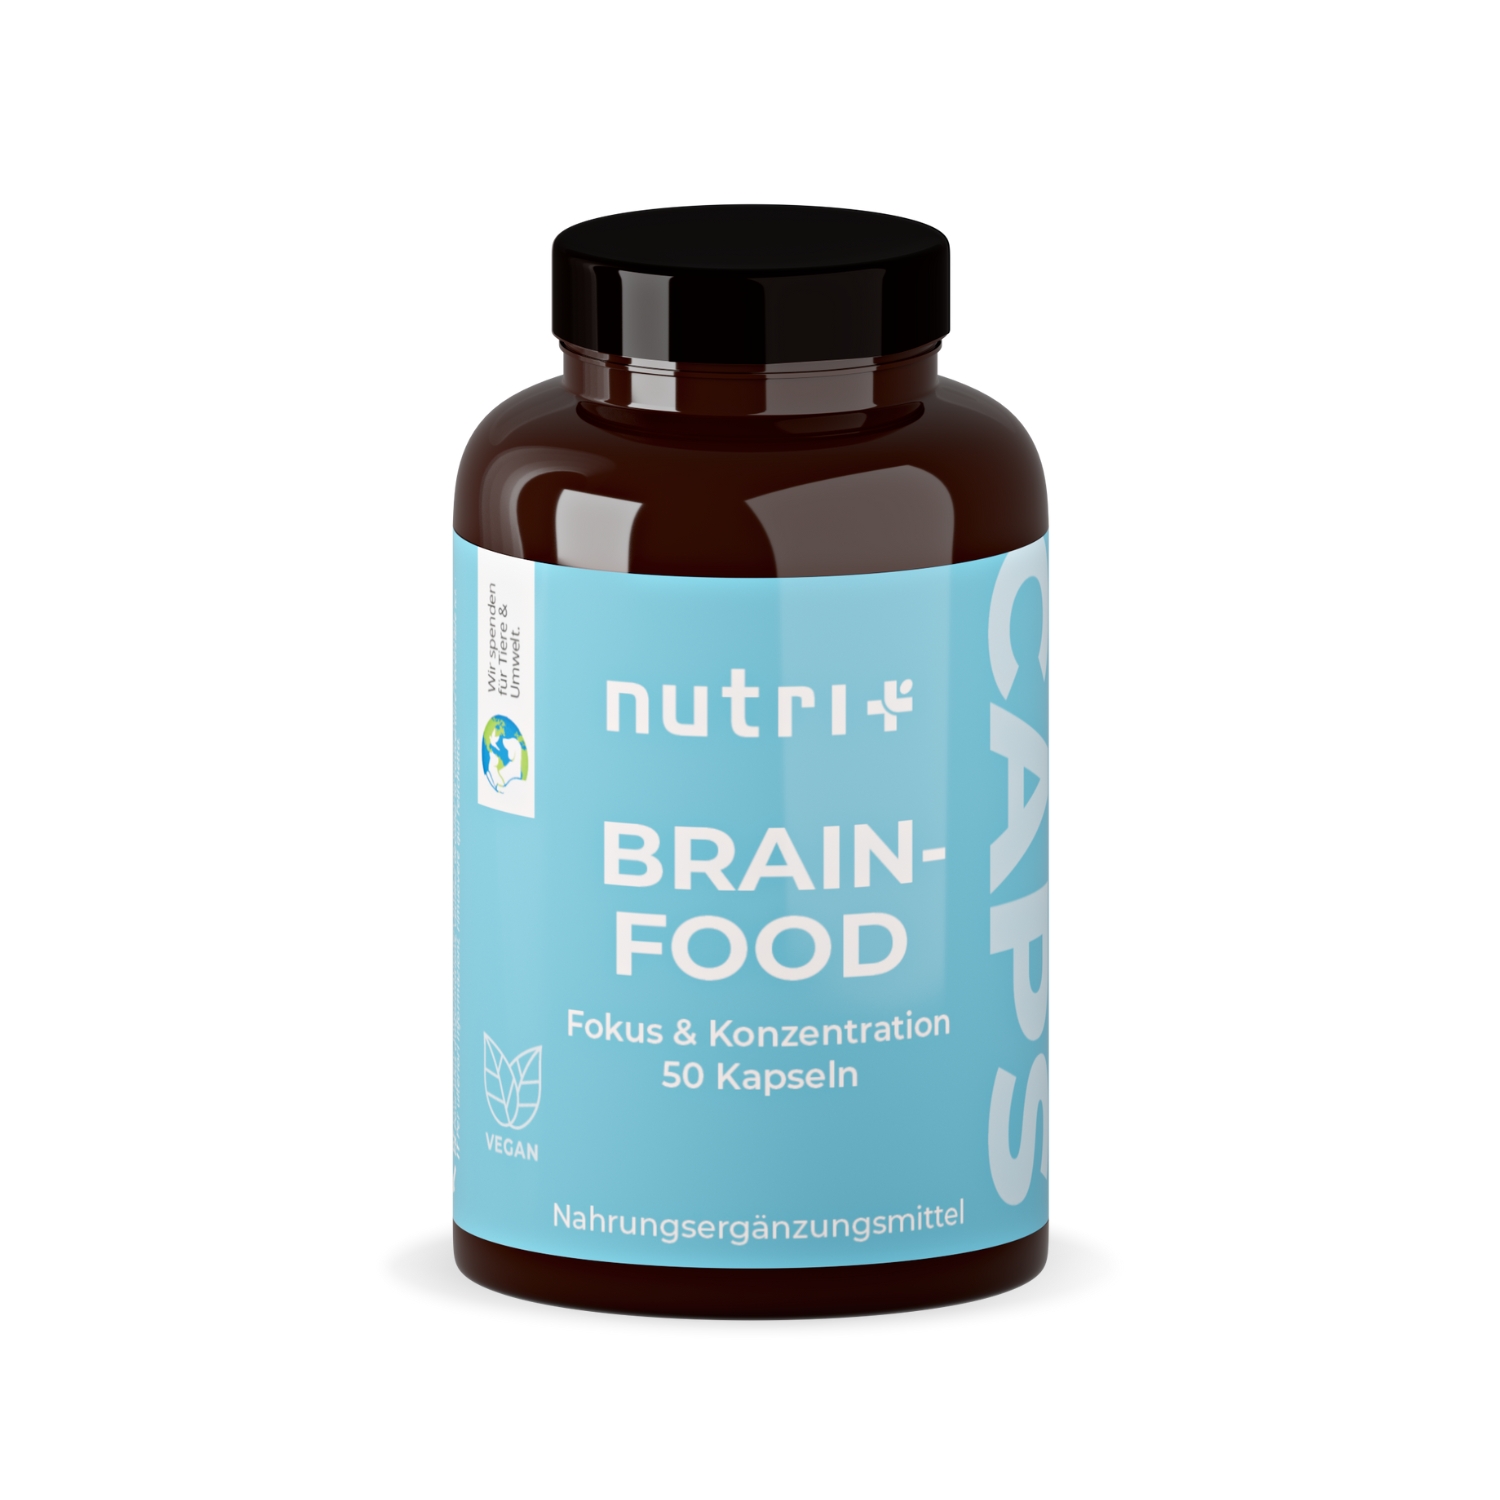 Brainfood capsules - nutrients for the brain